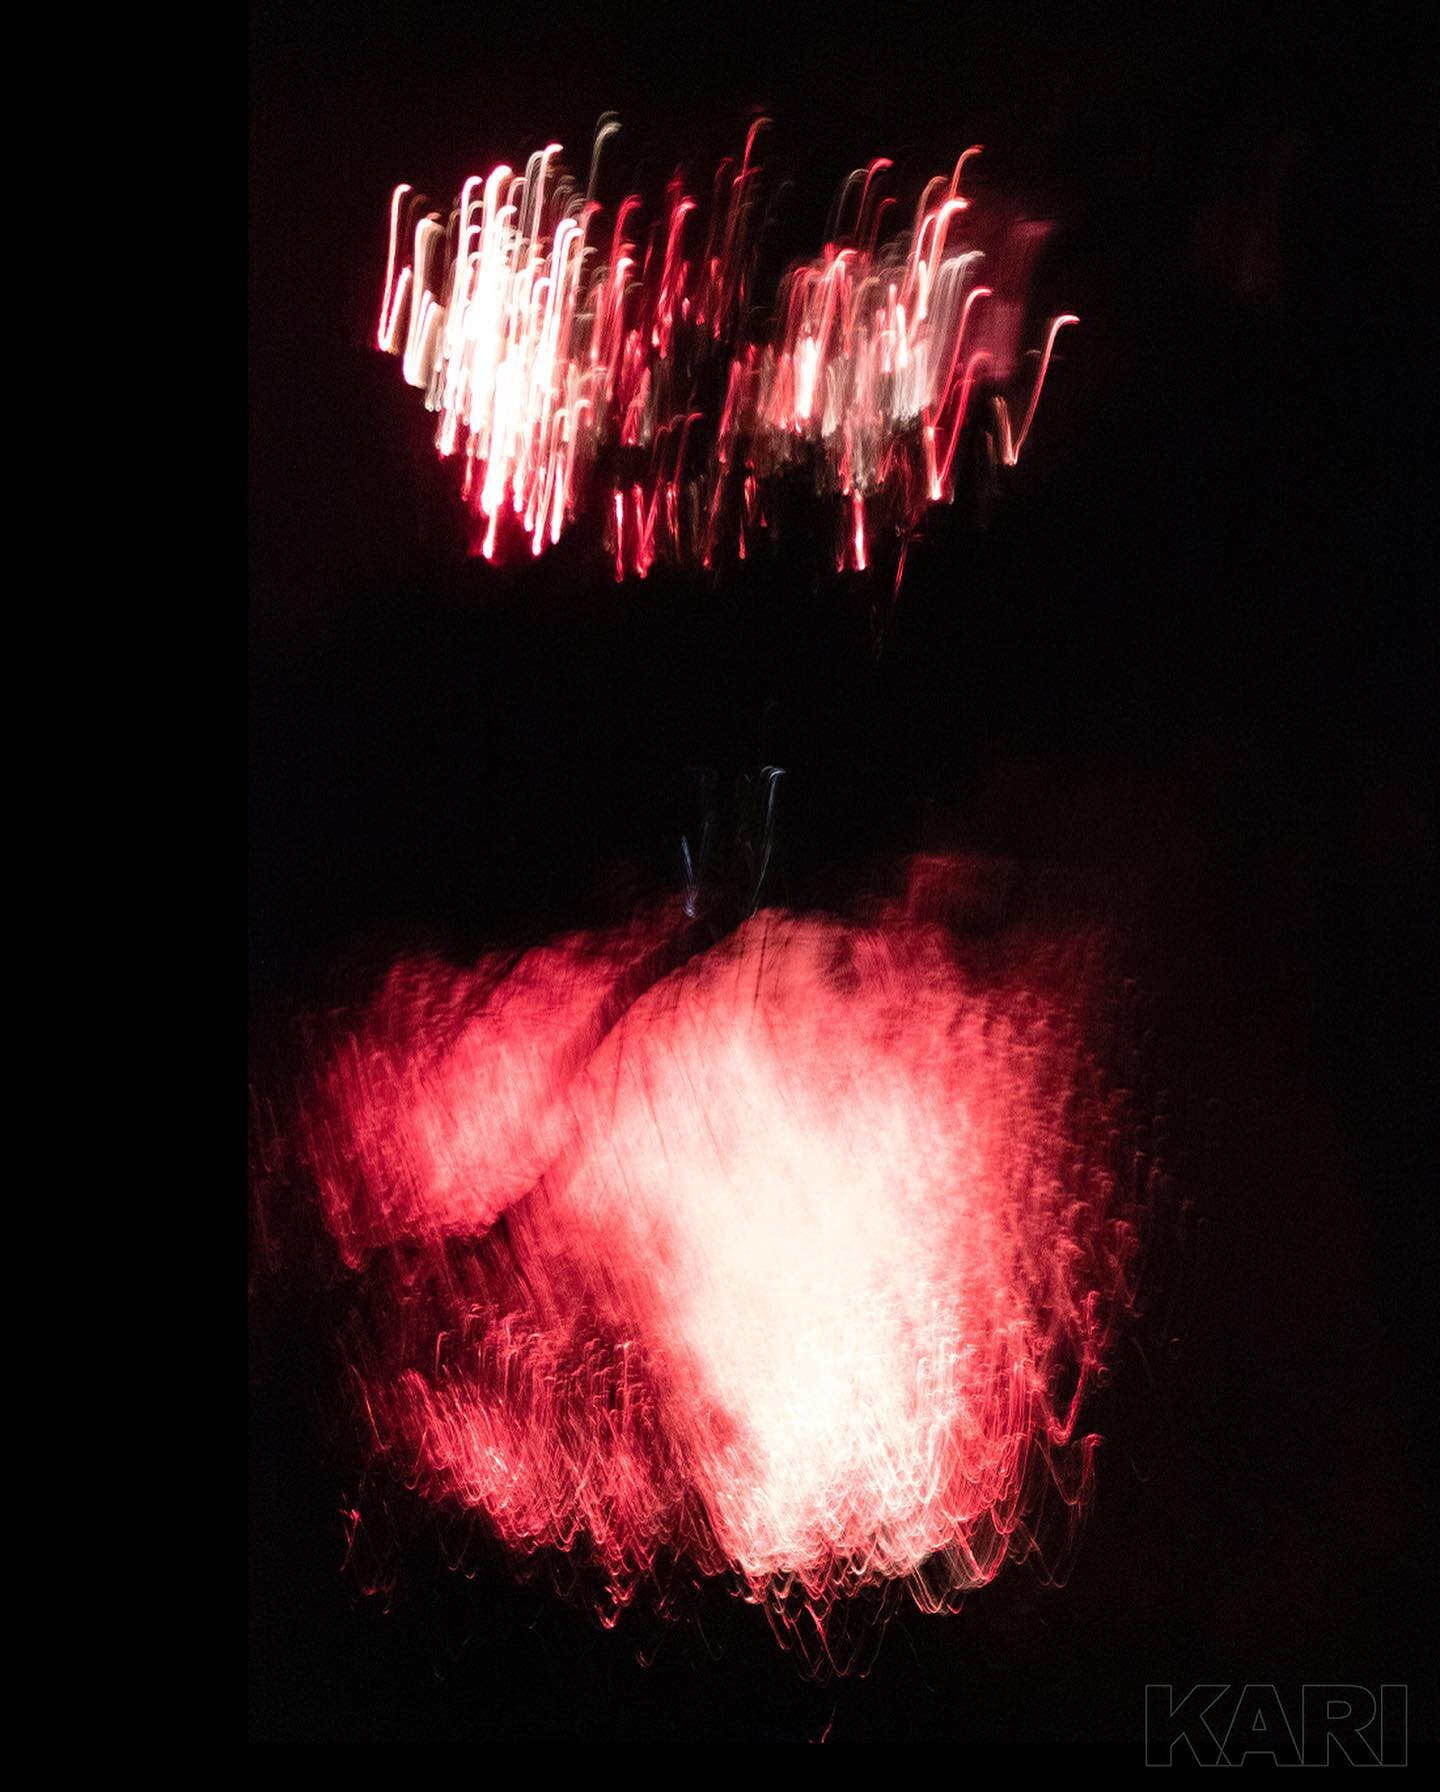 .
Light abstracted -
fireworks, trailing through the dark as light bursts and falls
reflected on water
sound and dark quiet
.
- Sondra
.
.
.
#throughmylens #illumination #photoabstract #colorandlight #lightonwater #onlinegallery #art #artgallery #vir